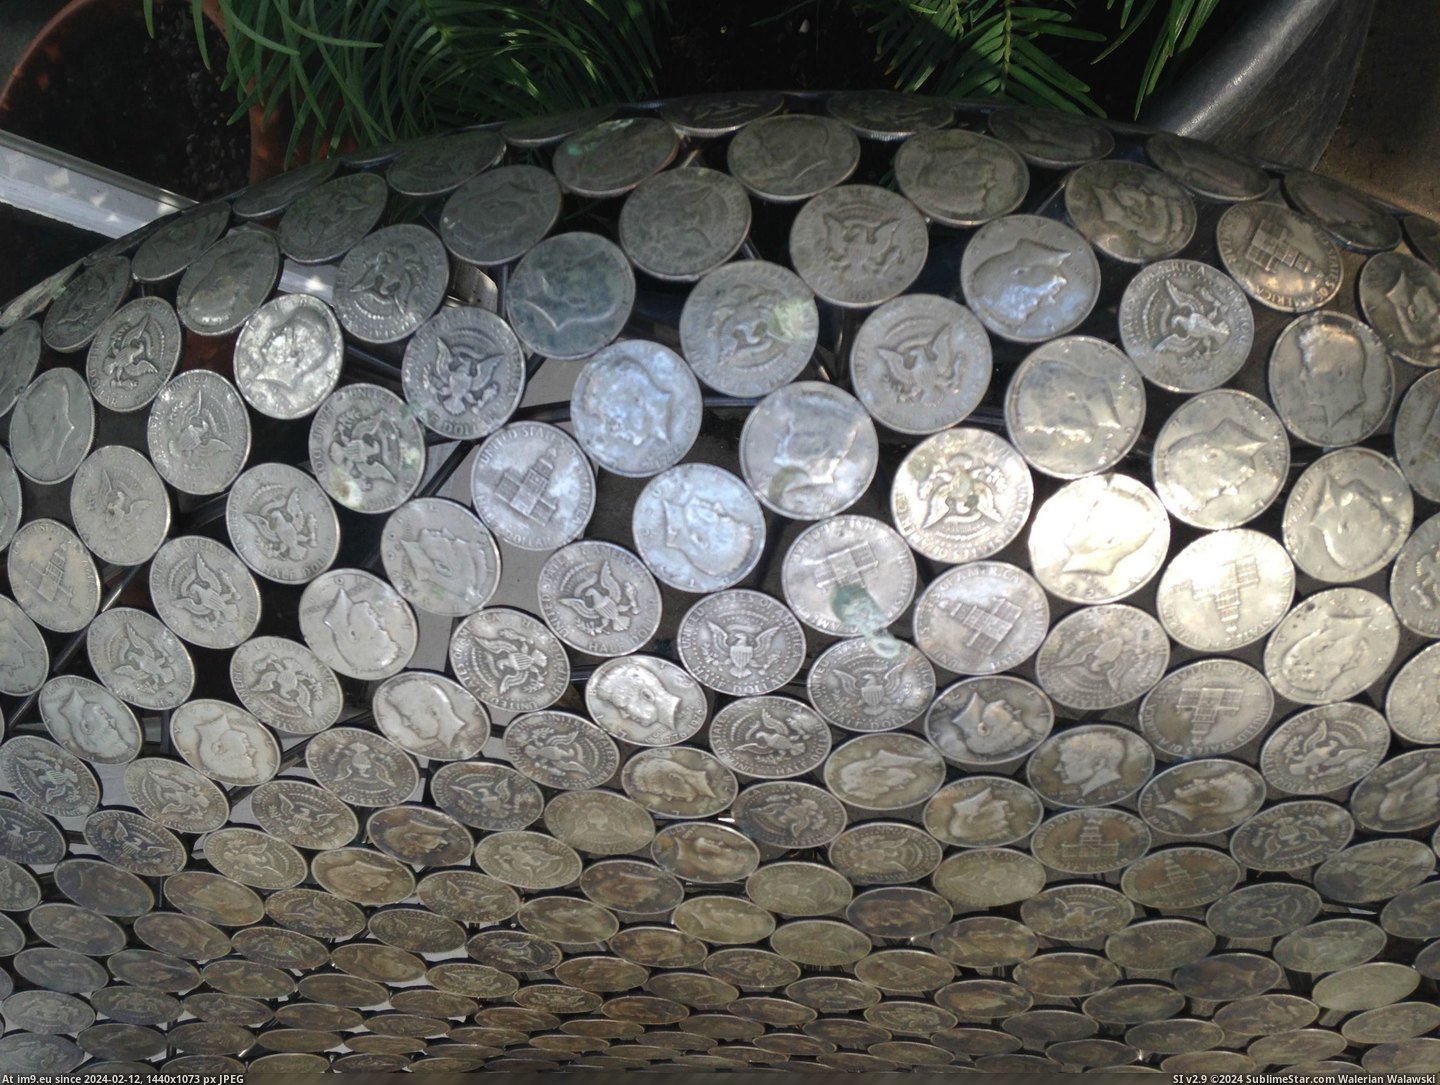 [Mildlyinteresting] This chair made out of old coins 3 (in My r/MILDLYINTERESTING favs)